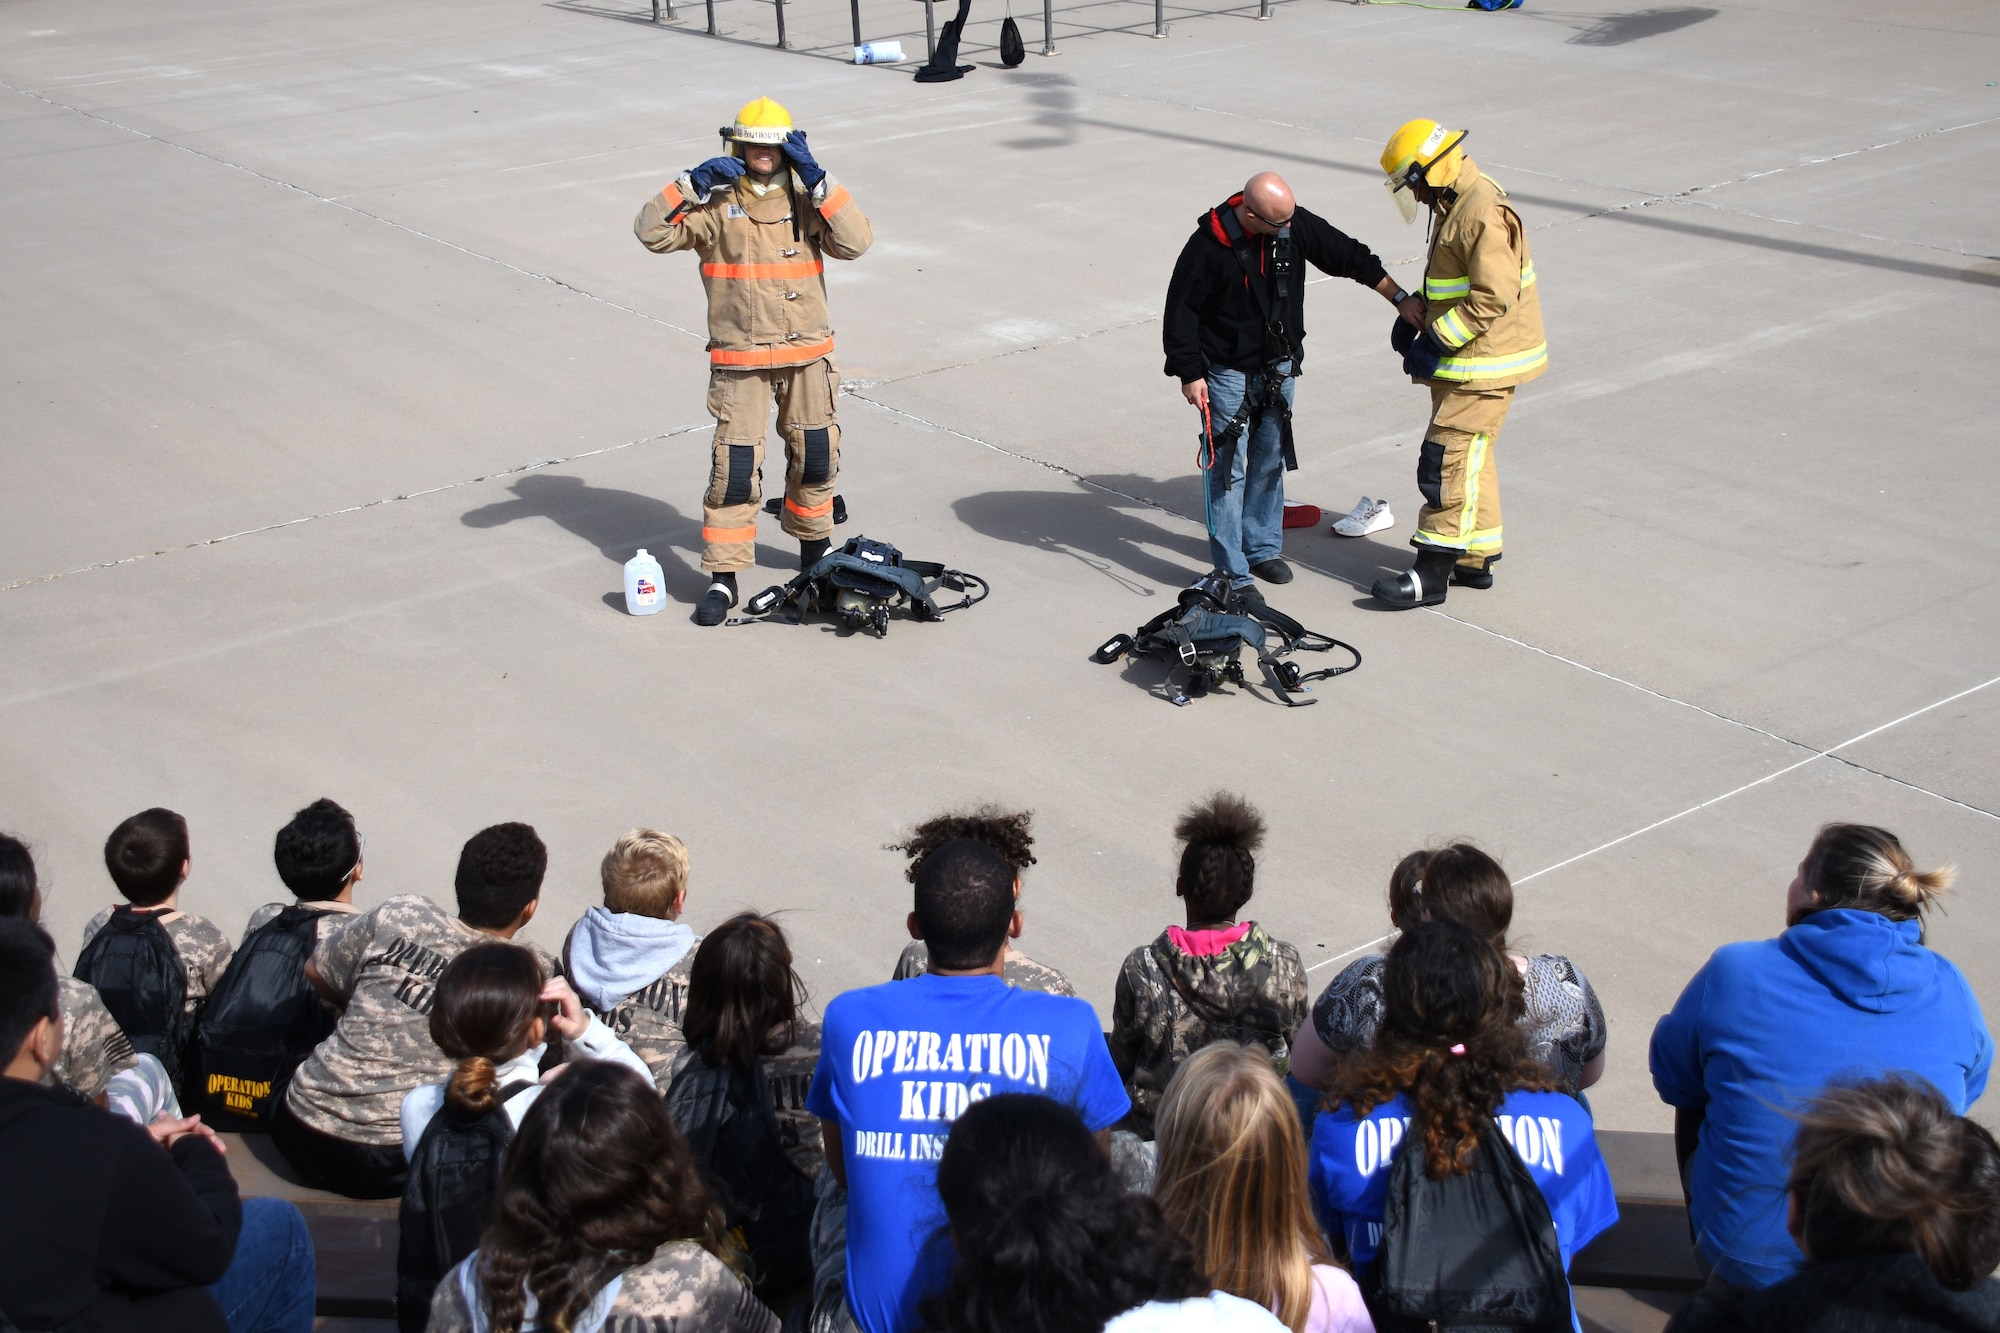 Members of the Louis F. Garland Department of Defense Fire Academy demonstrate how quickly firemen are to get suited up in case of an emergency to a group of Operation KIDS participants at the Louis F. Garland Department of Defense Fire Academy on Goodfellow Air Force Base, Texas, Nov. 3, 2018. After receiving the demonstration, the children were able to explore some of the fire trucks and witness them shooting water at a stationary object. (U.S. Air Force photo by Airman 1st Class Seraiah Hines/Released)